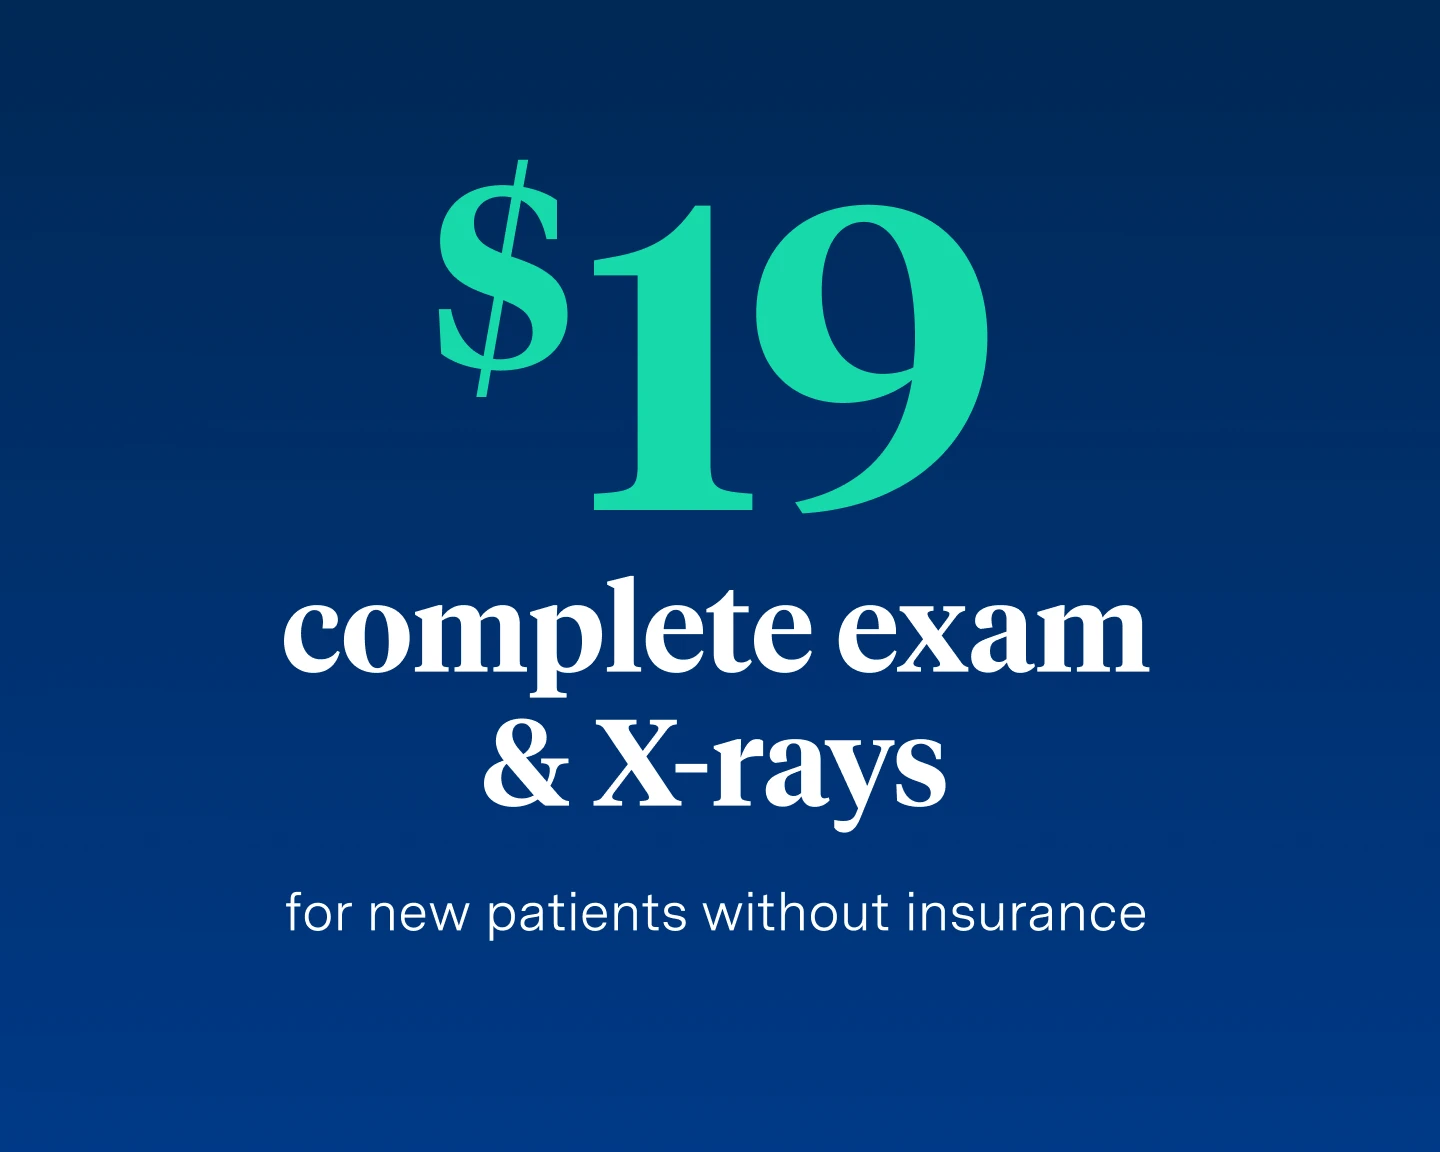 $19 complete exam & X-rays for new patients without insurance. 